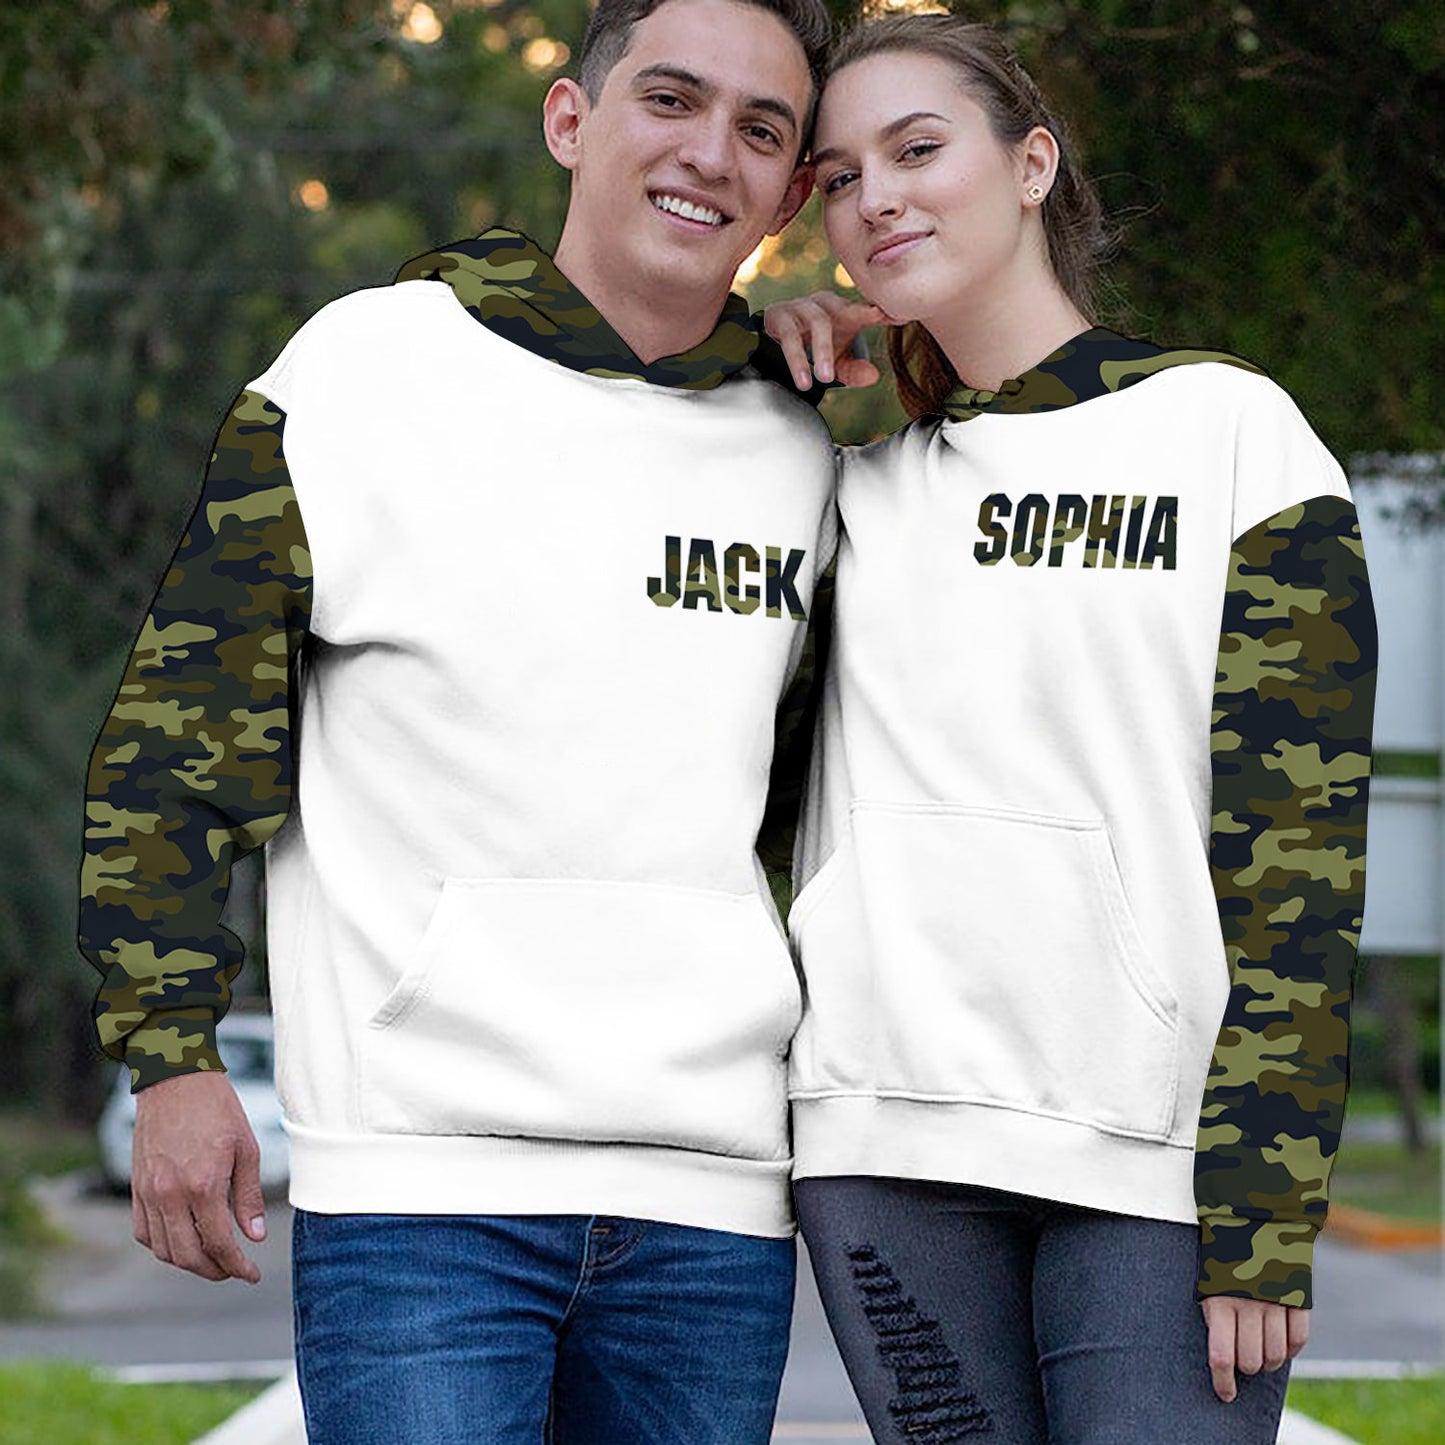 Bonnie and Clyde Custom Name And Number All Over Print Valentine Gift Couple Matching 3D Hoodie Personalizedwitch For Couple